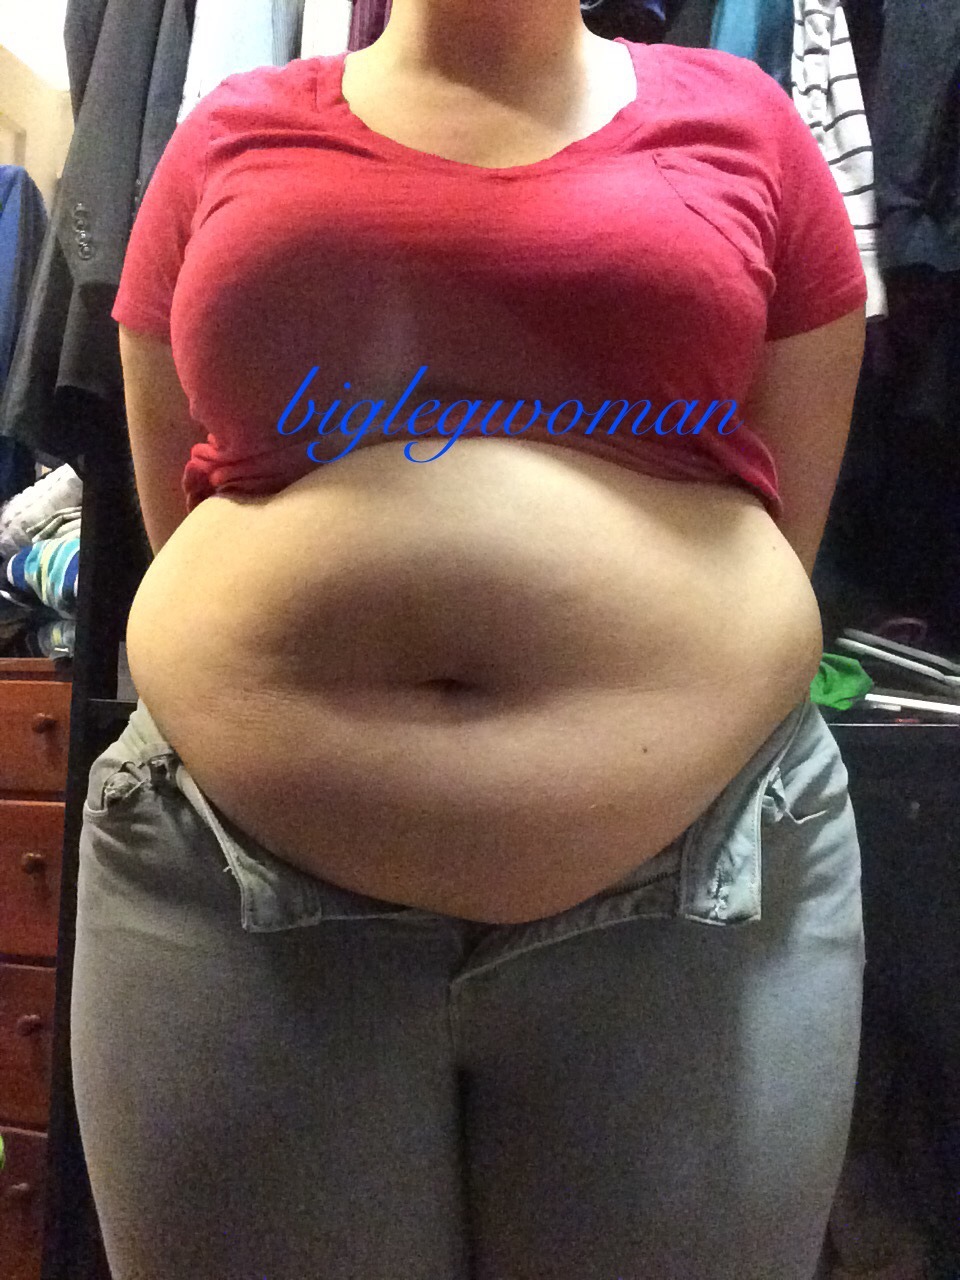 bavarian-fa:  biglegwoman:  Way too fat for these size 16s! These pictures don’t